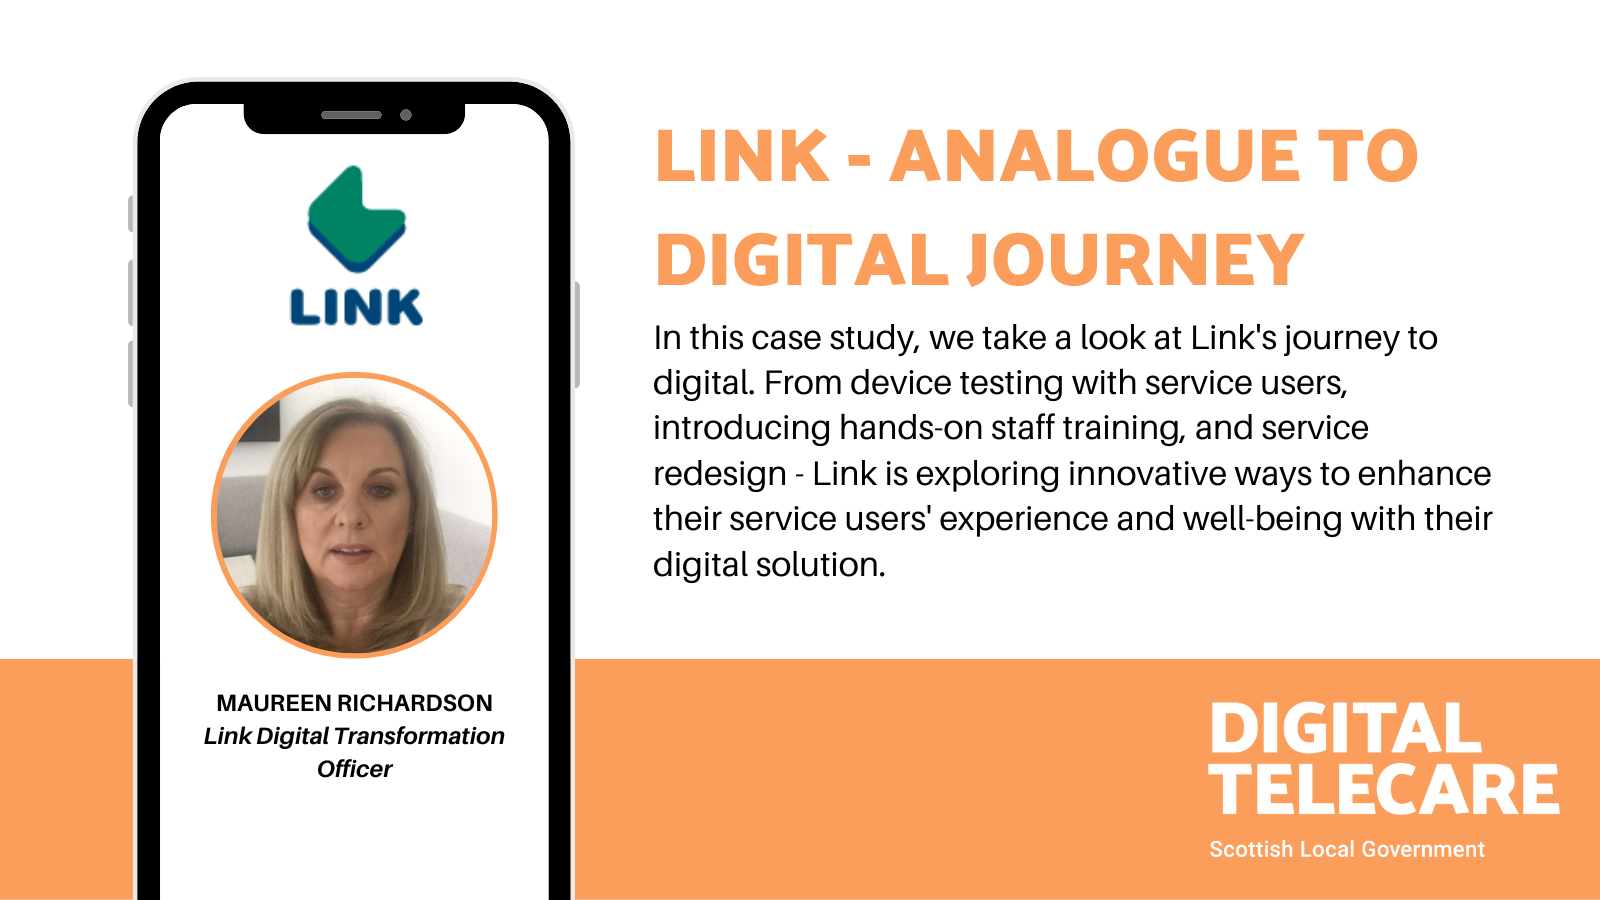 Link - Analogue to Digital Journey